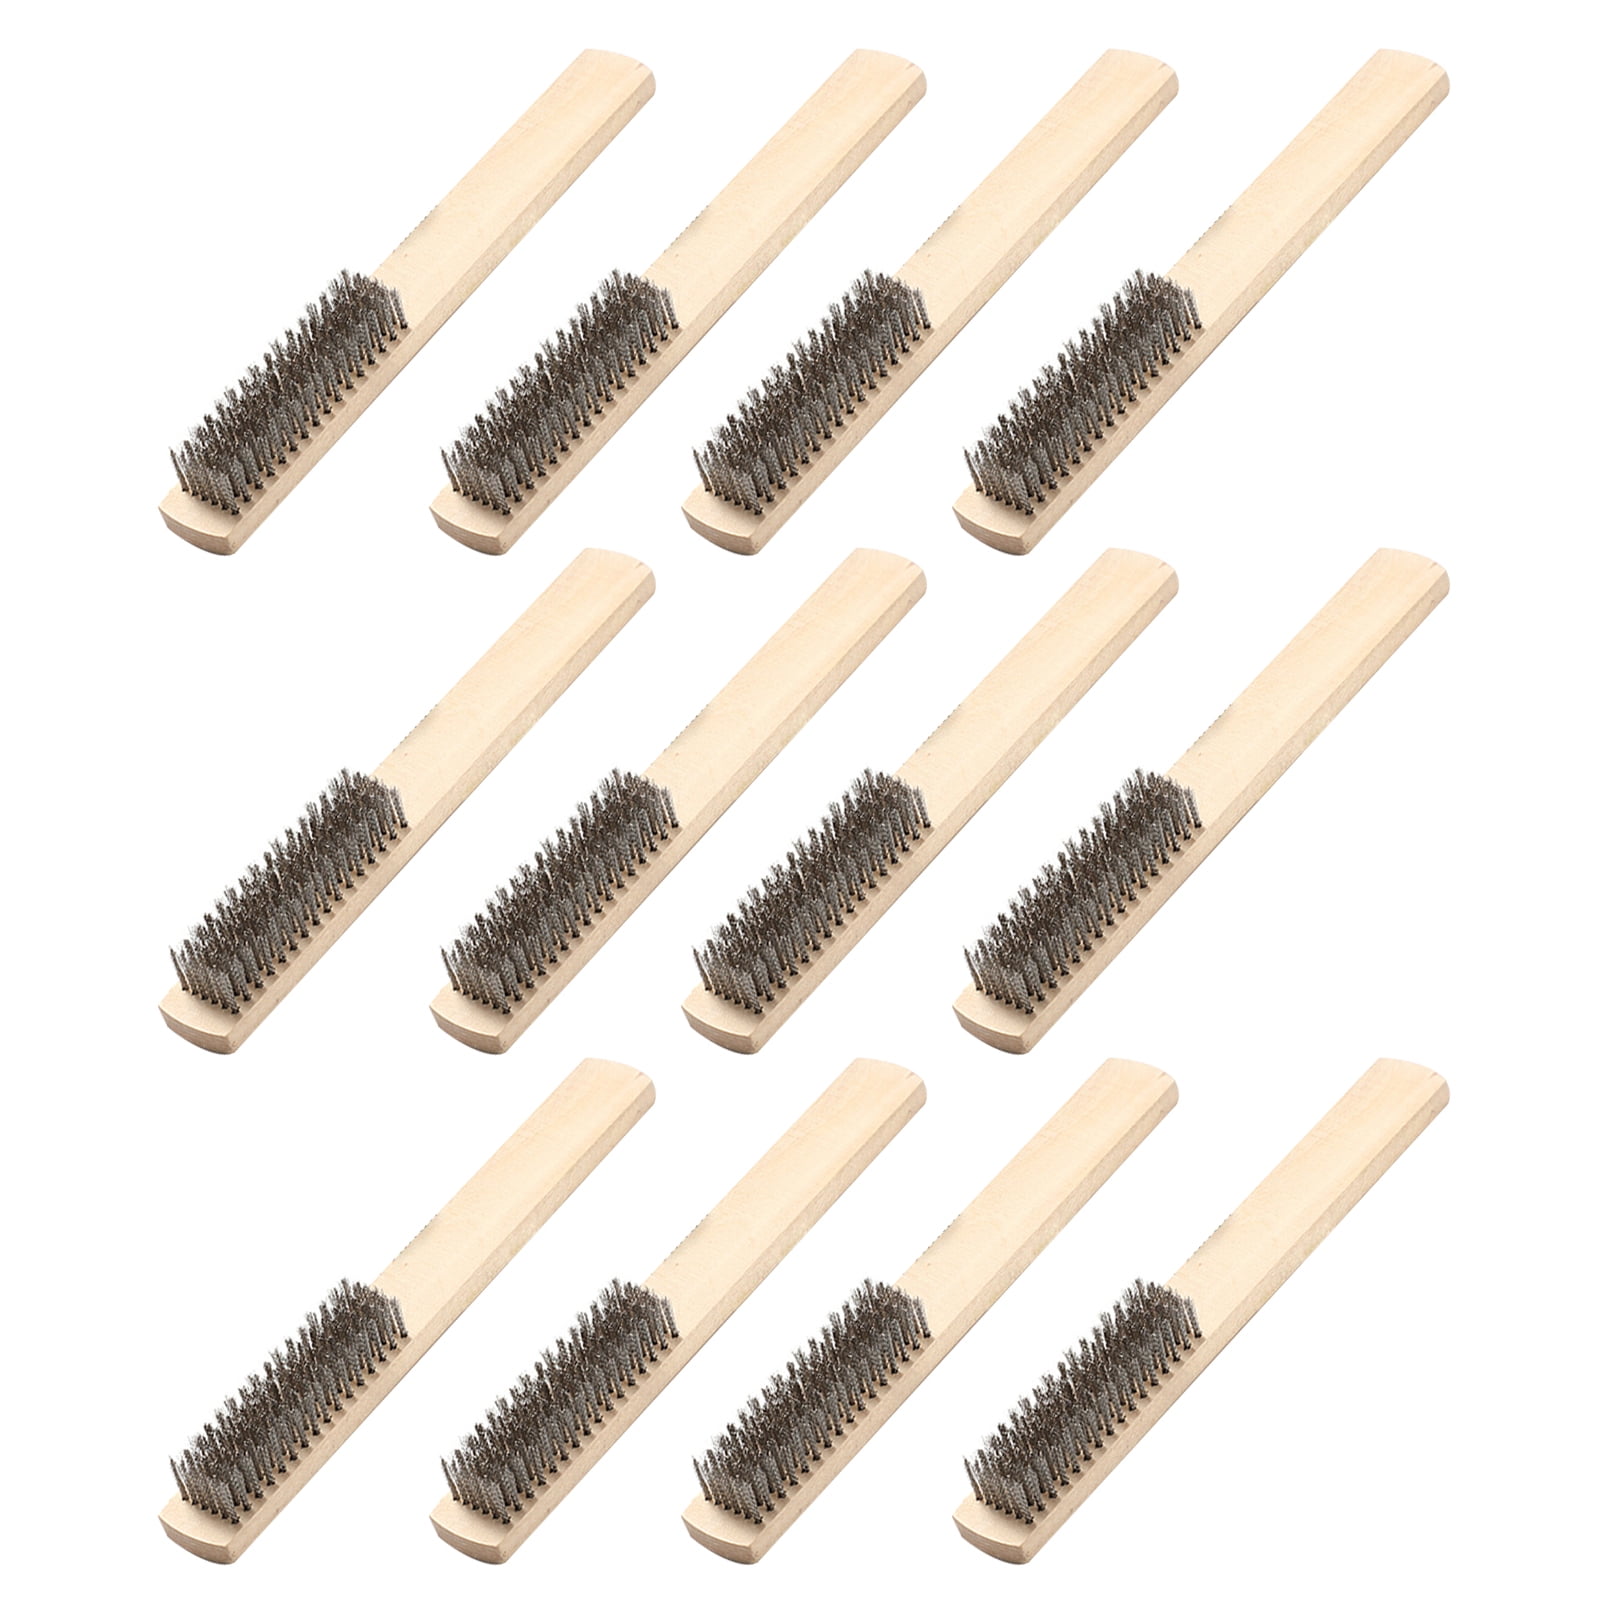 Details about   Wood Handle Wire Brush Stainless Steel Paint Remove Rust Brushes Cleaning Tools. 